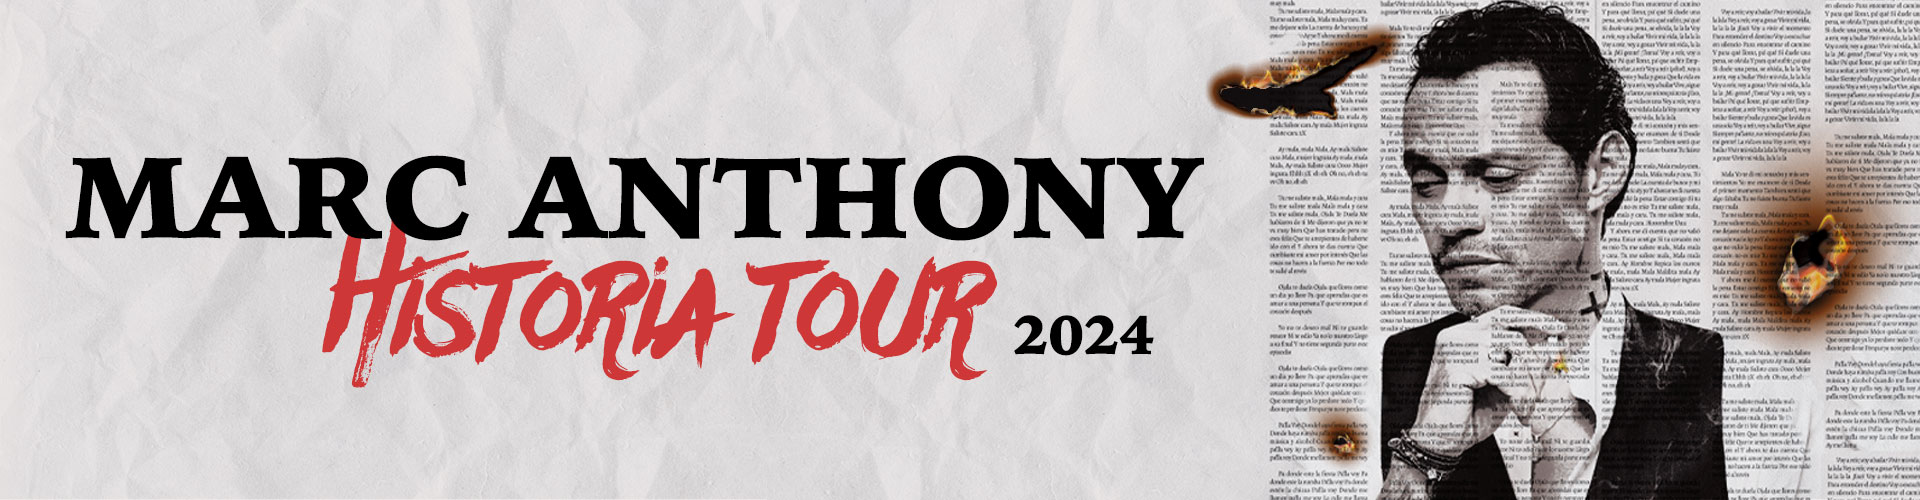 marc anthony tour tickets